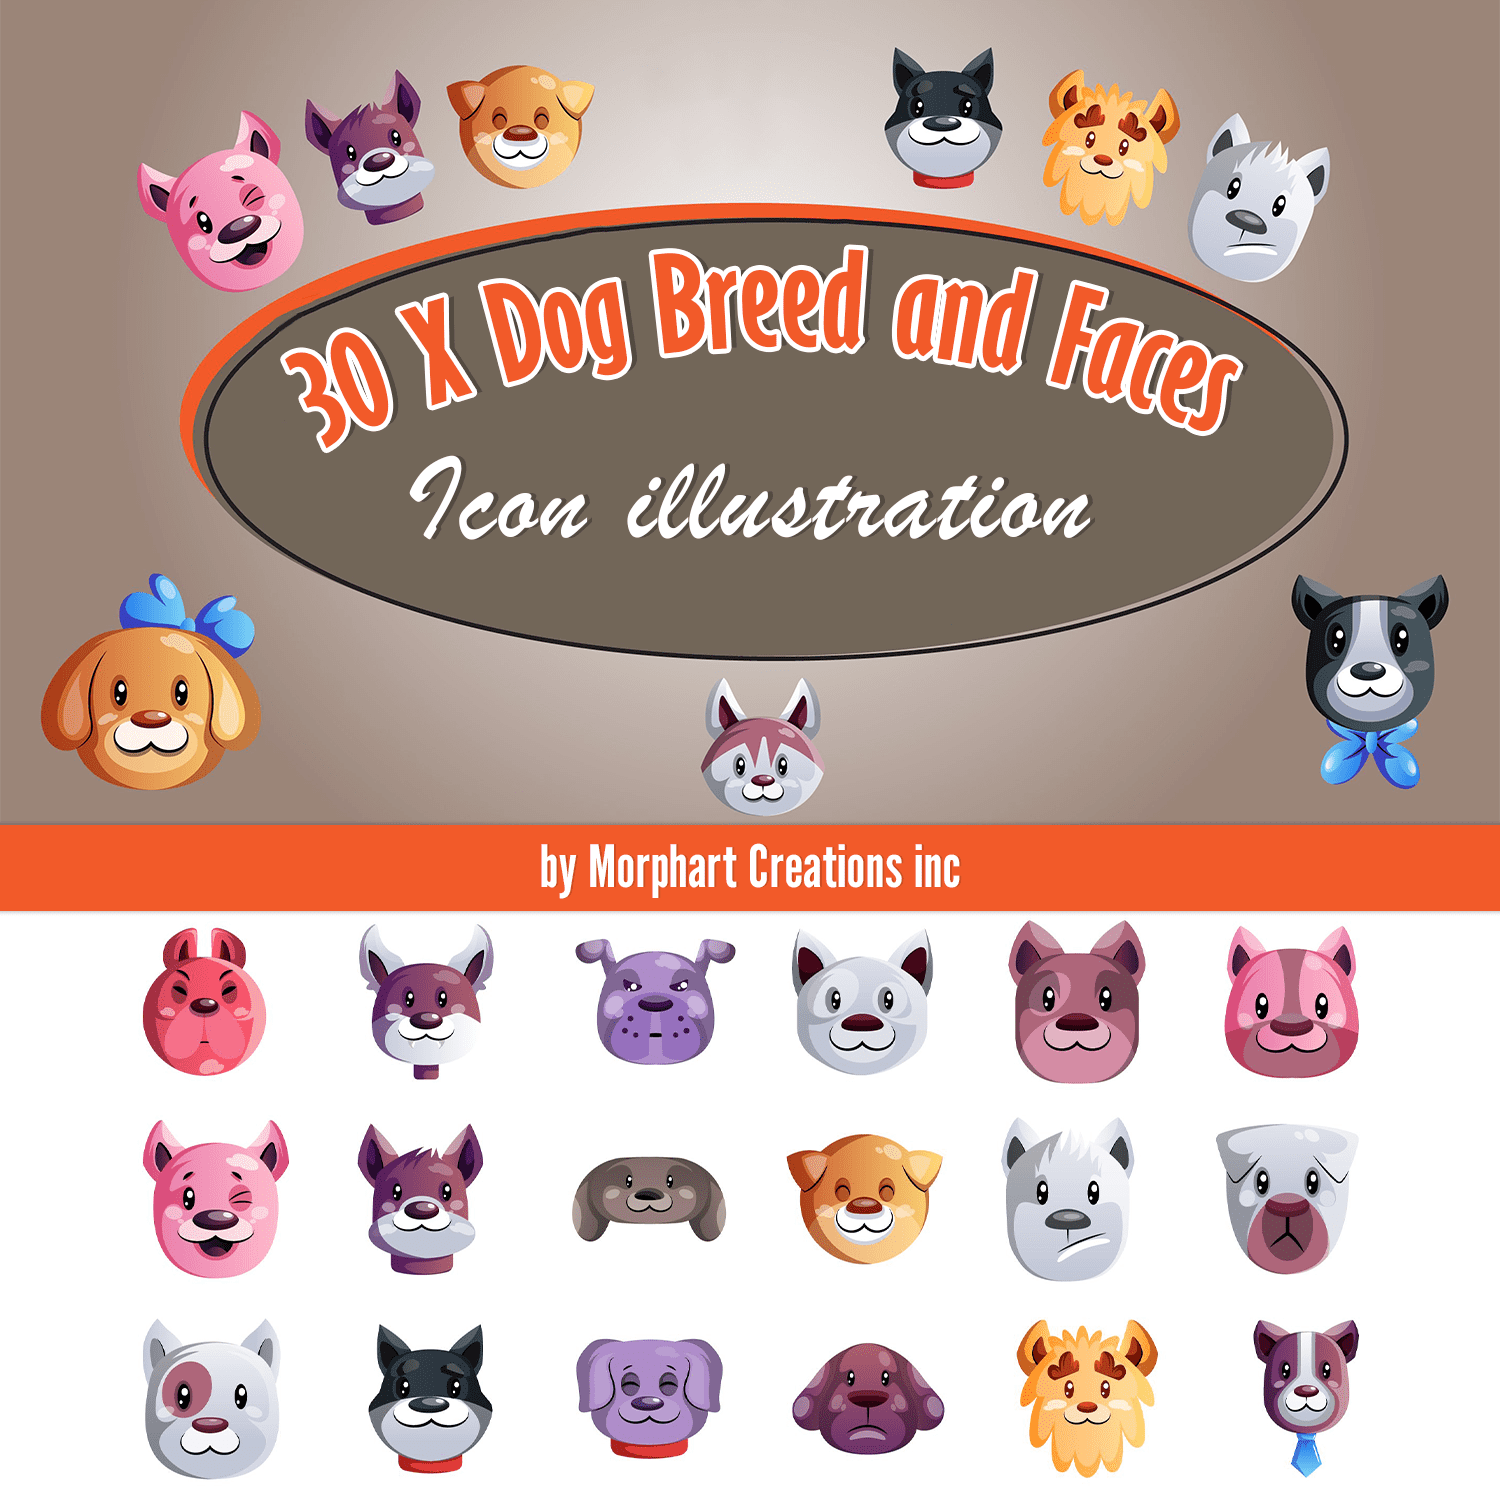 Prints of dog breed and faces icon illustration.